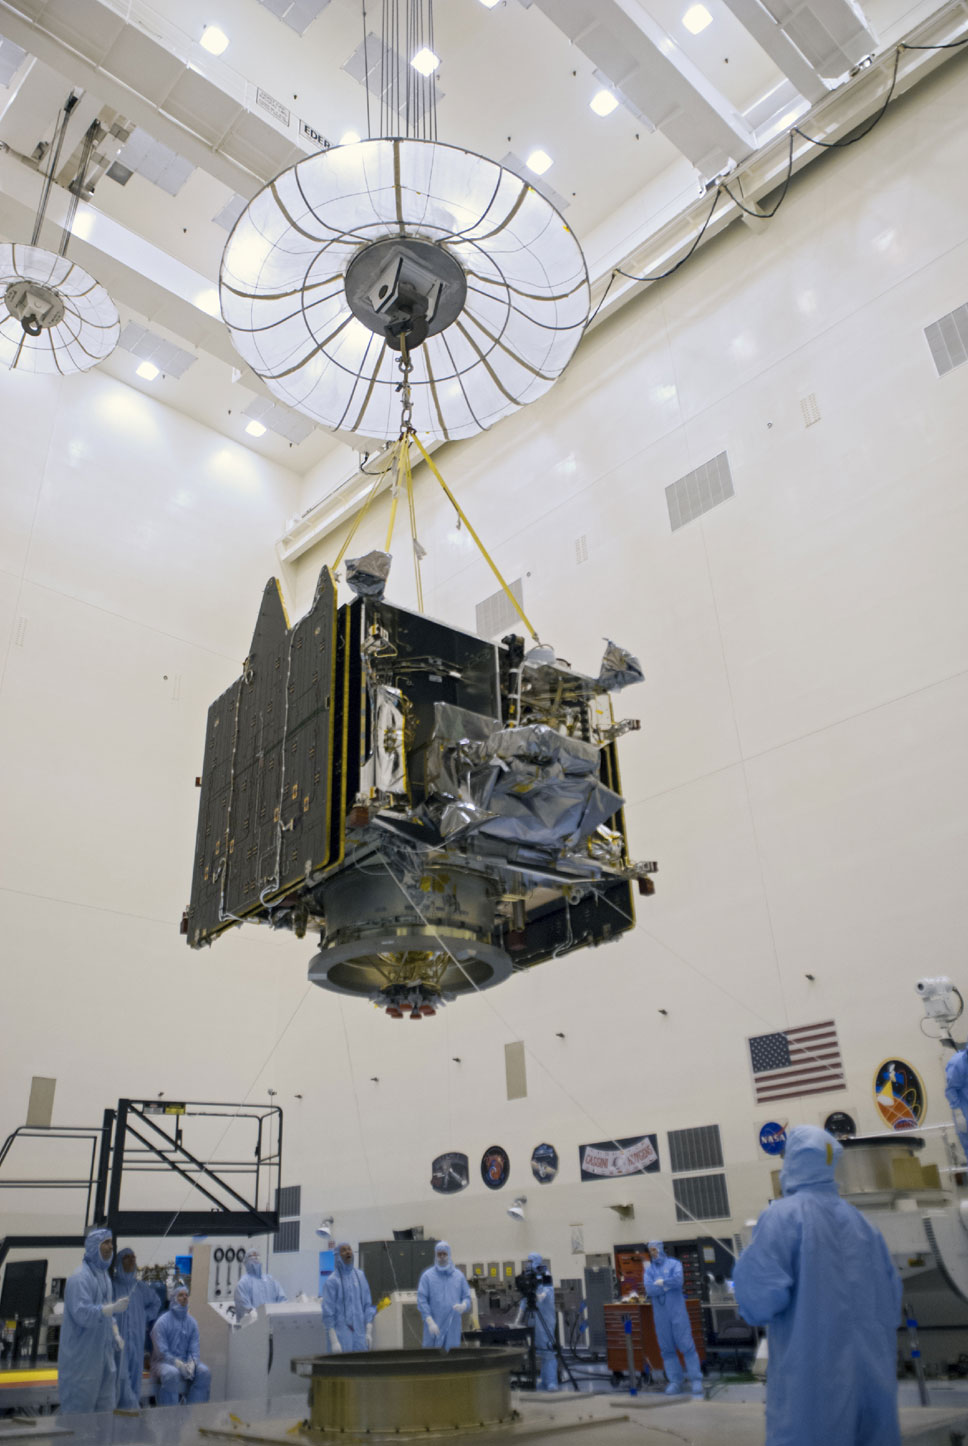 A crane lifts the MAVEN spacecraft inside the Payload Hazardous Servicing Facility on Aug. 3, 2013.